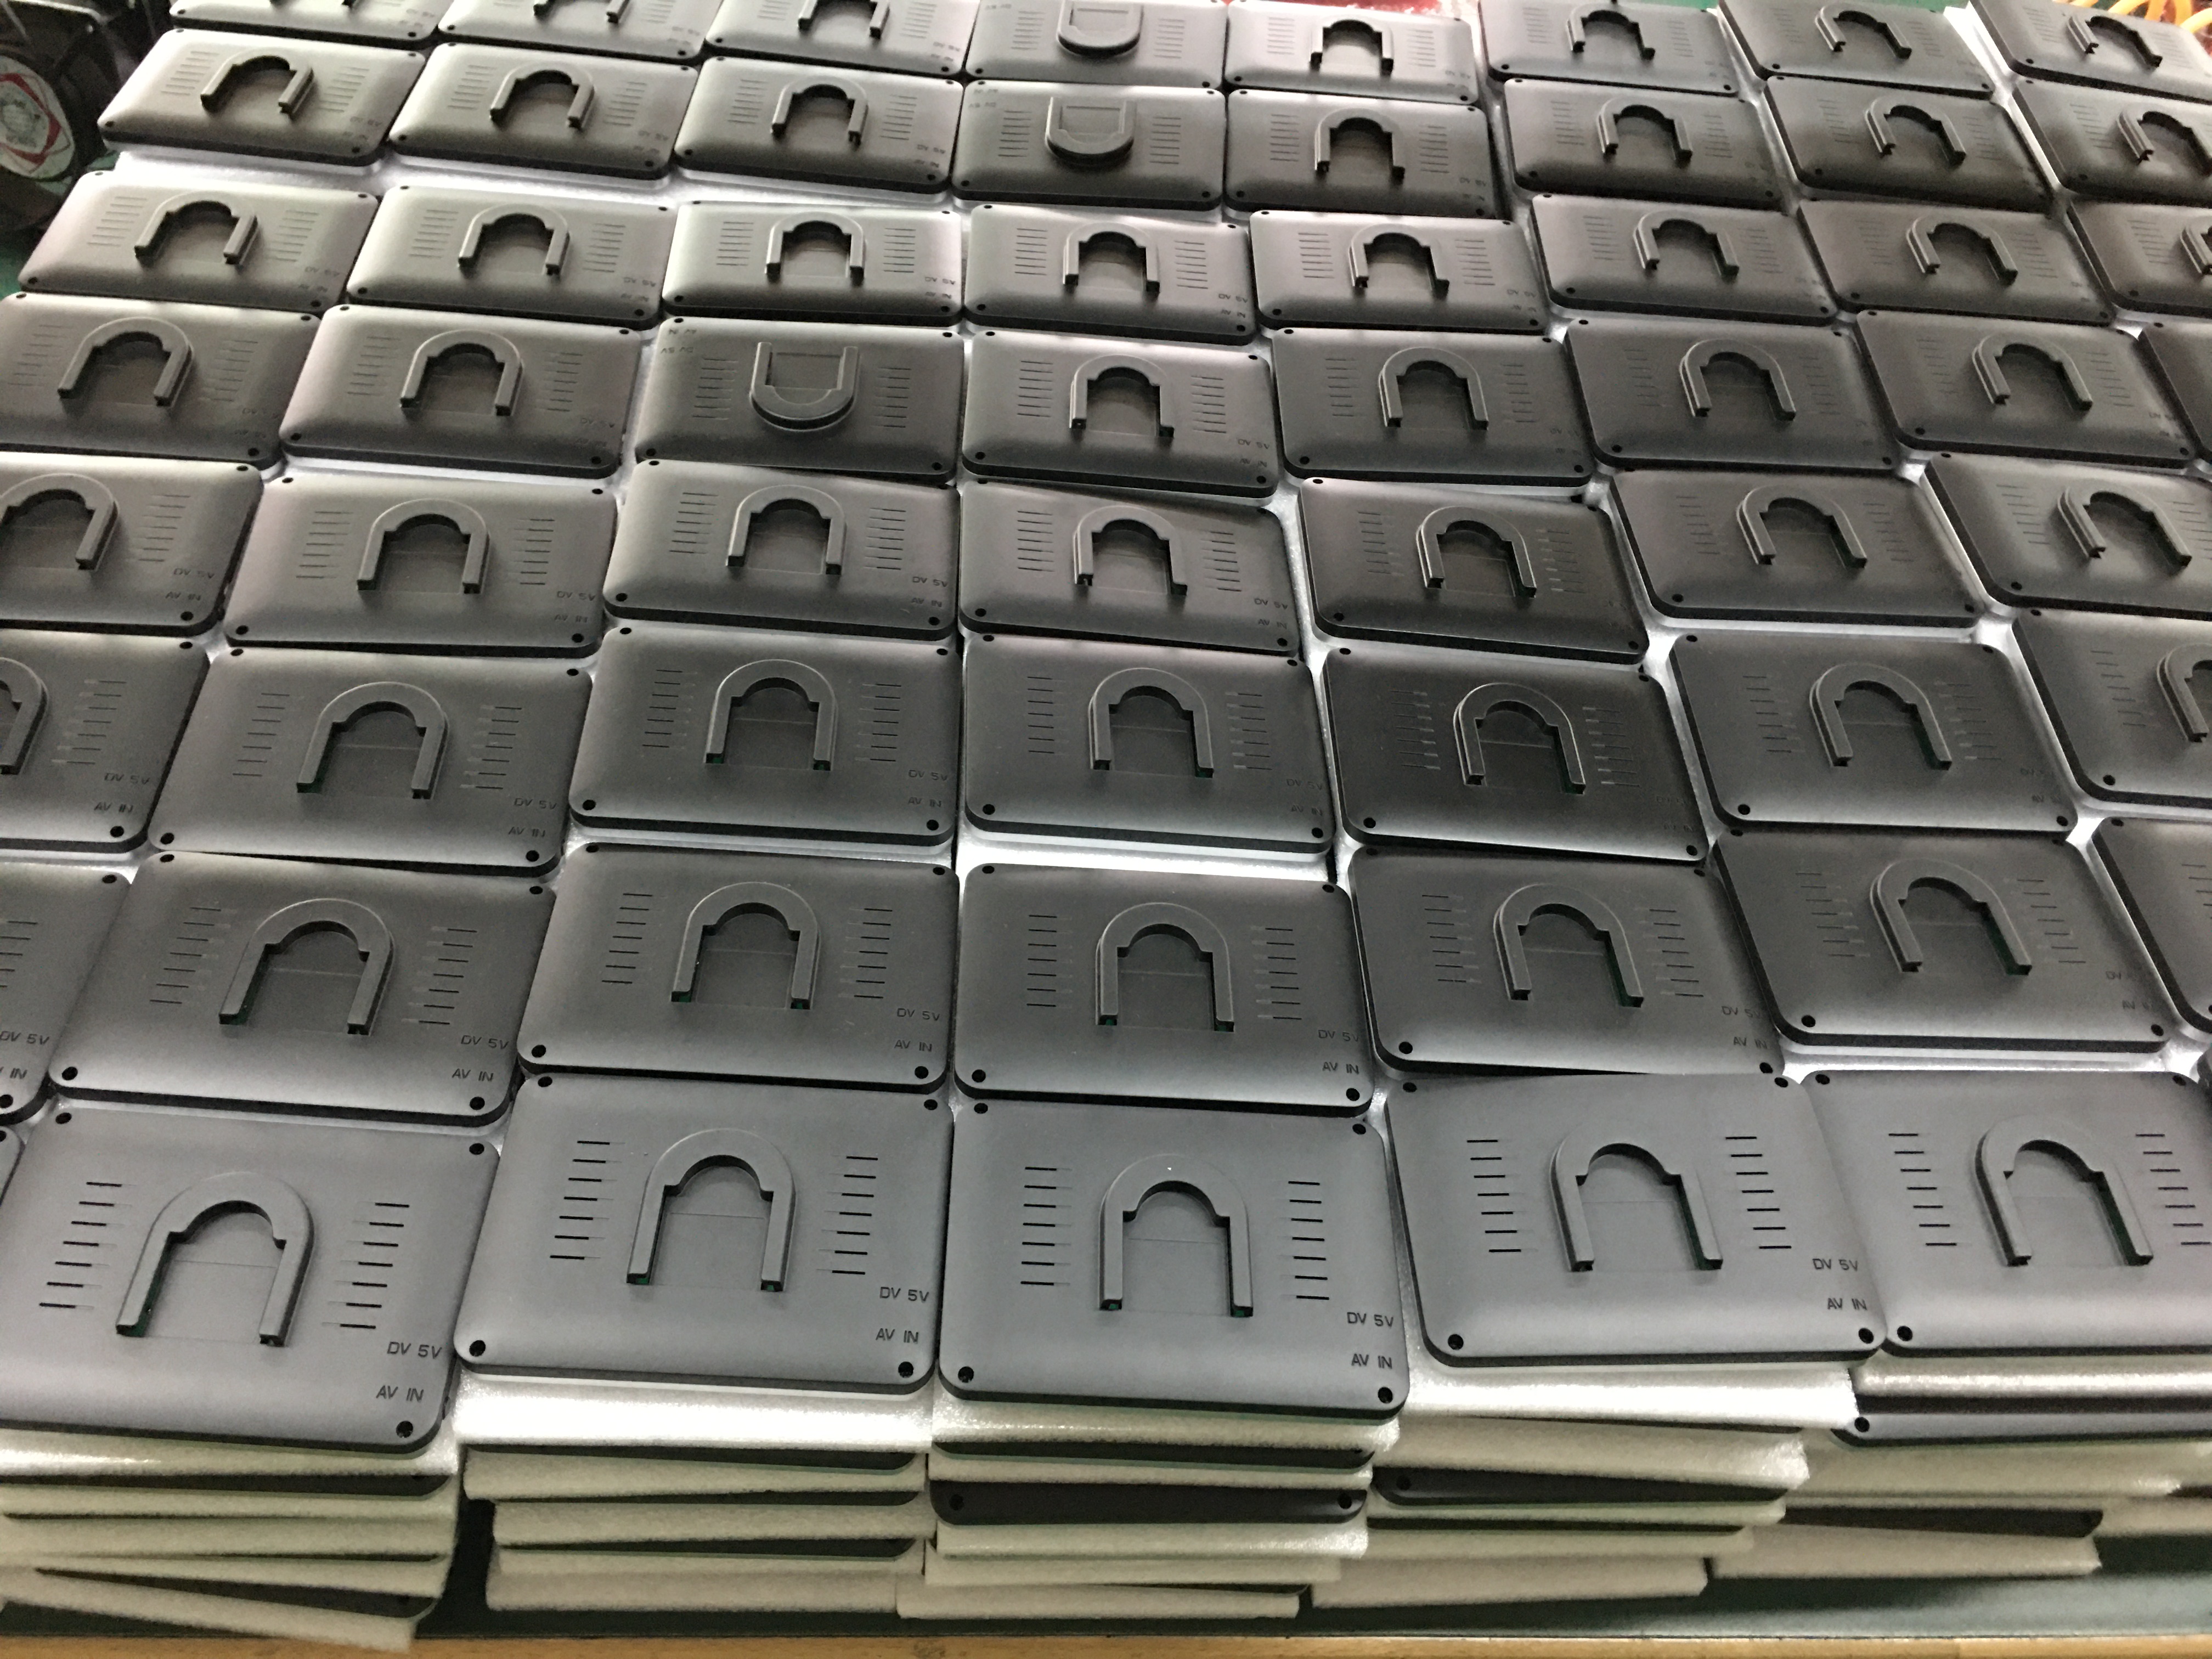 another 1000pcs of mini car monitors are waiting for testing and packing